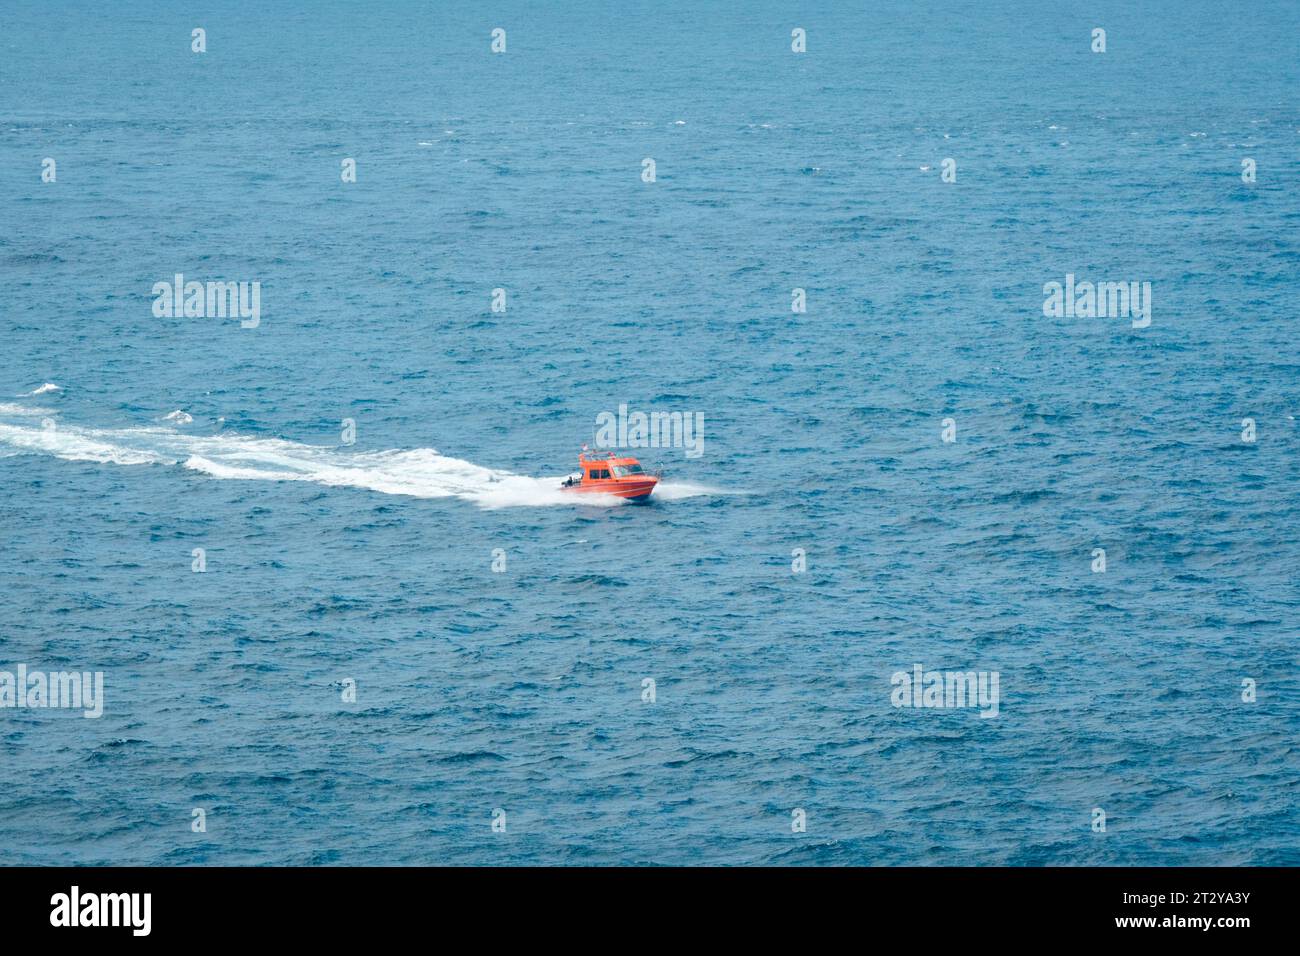 Experience the thrill of speed and the vastness of the open sea as an orange speedboat races across the deep blue waters. Stock Photo